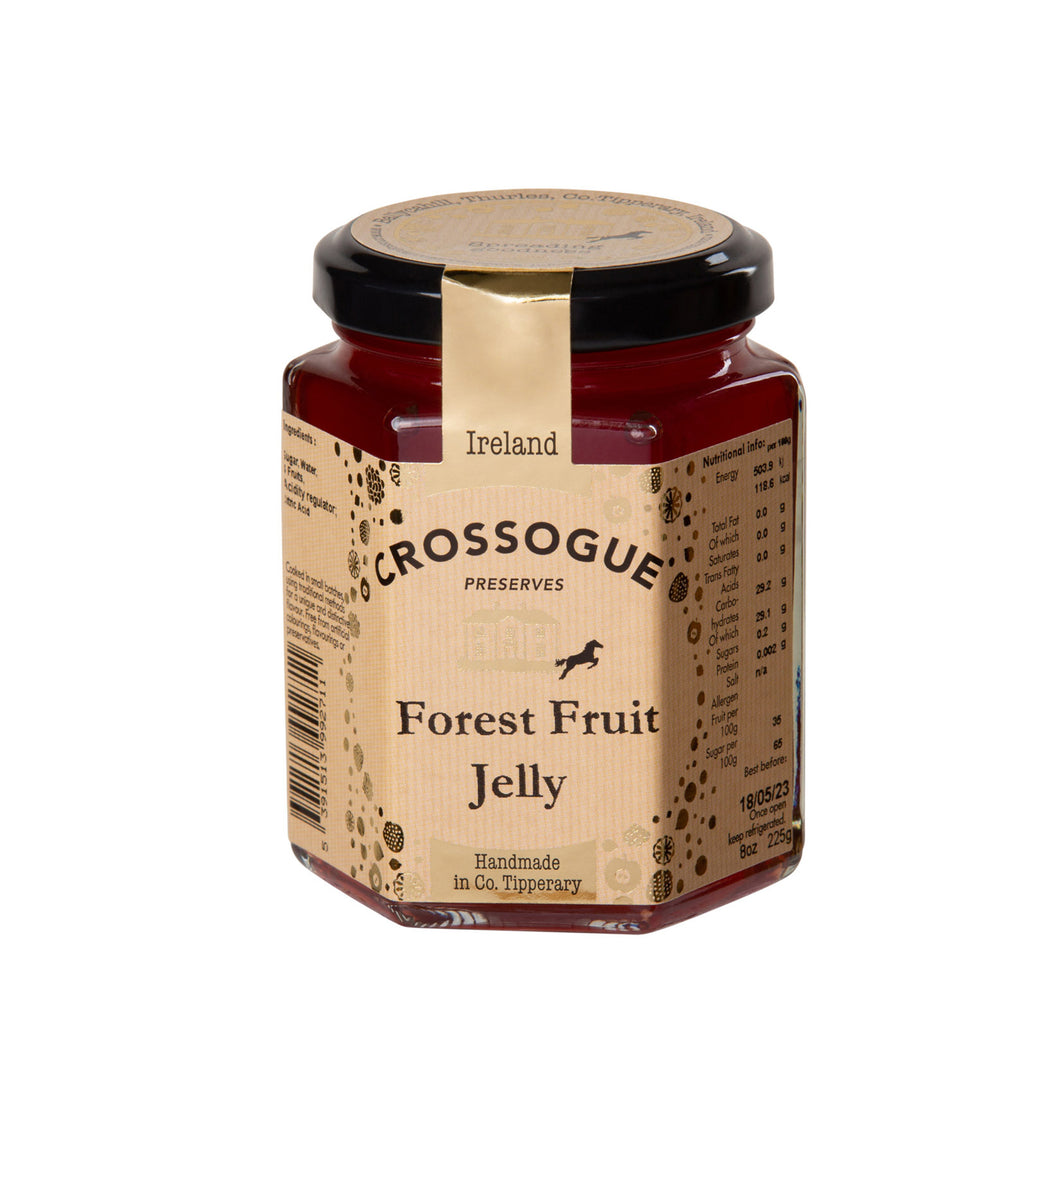 Forest Fruit Jelly